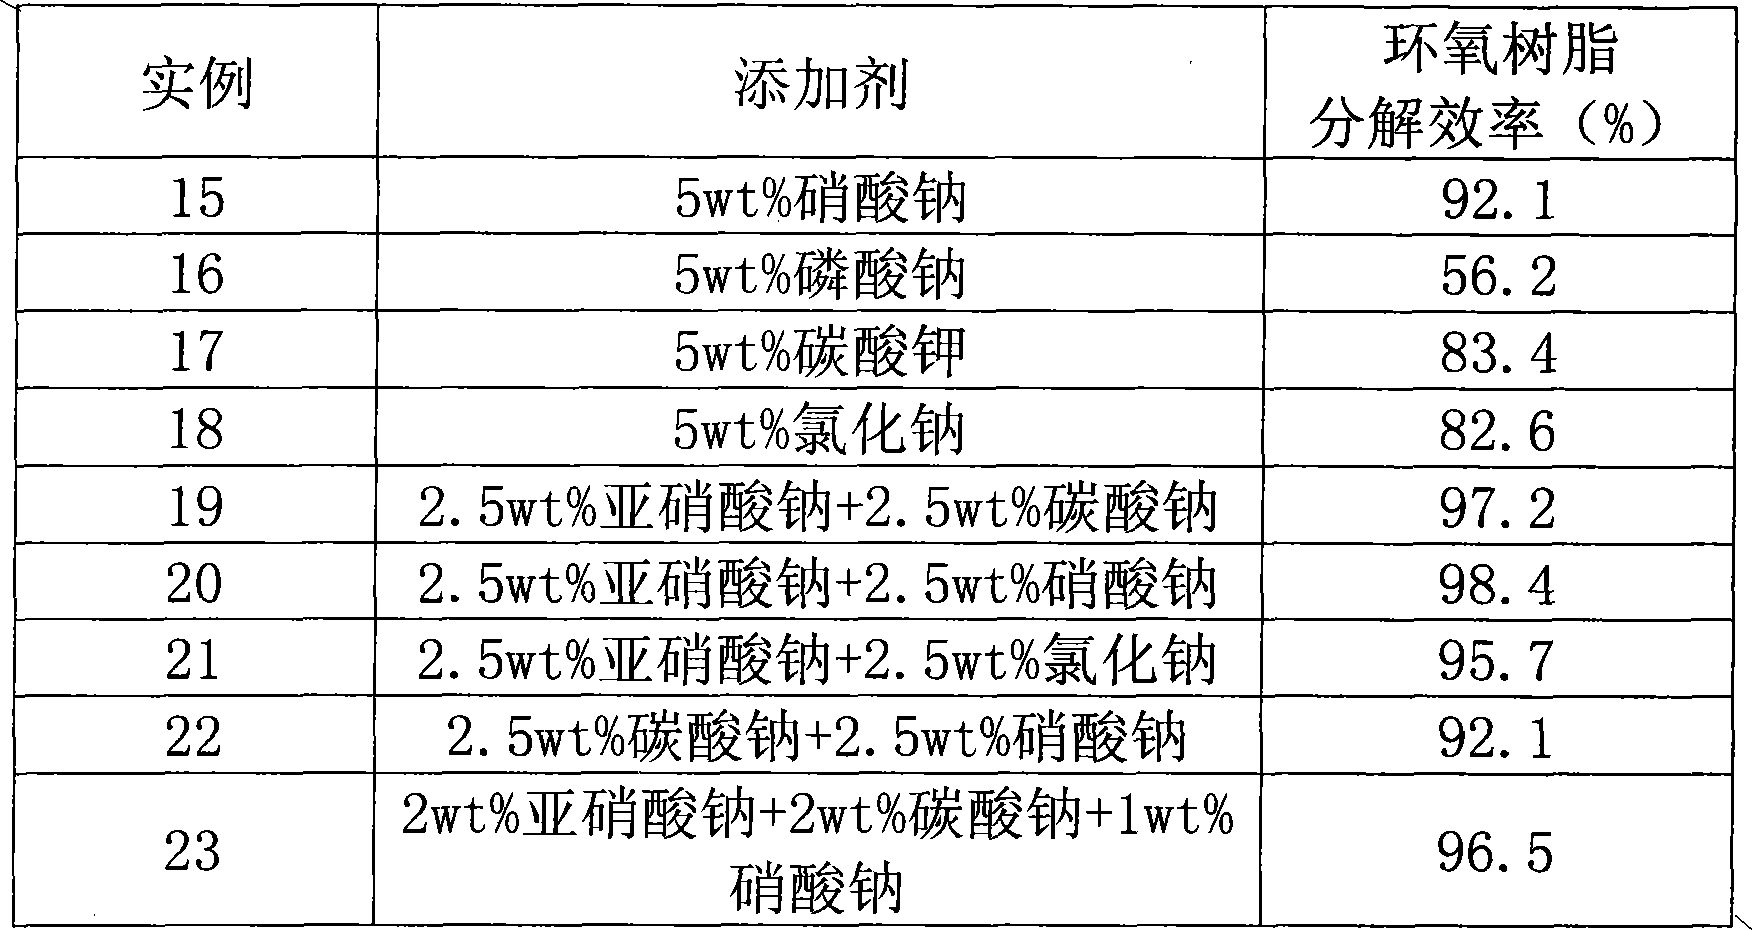 Molten bath and method for recycling thermosetting epoxy resin or composite material by using same